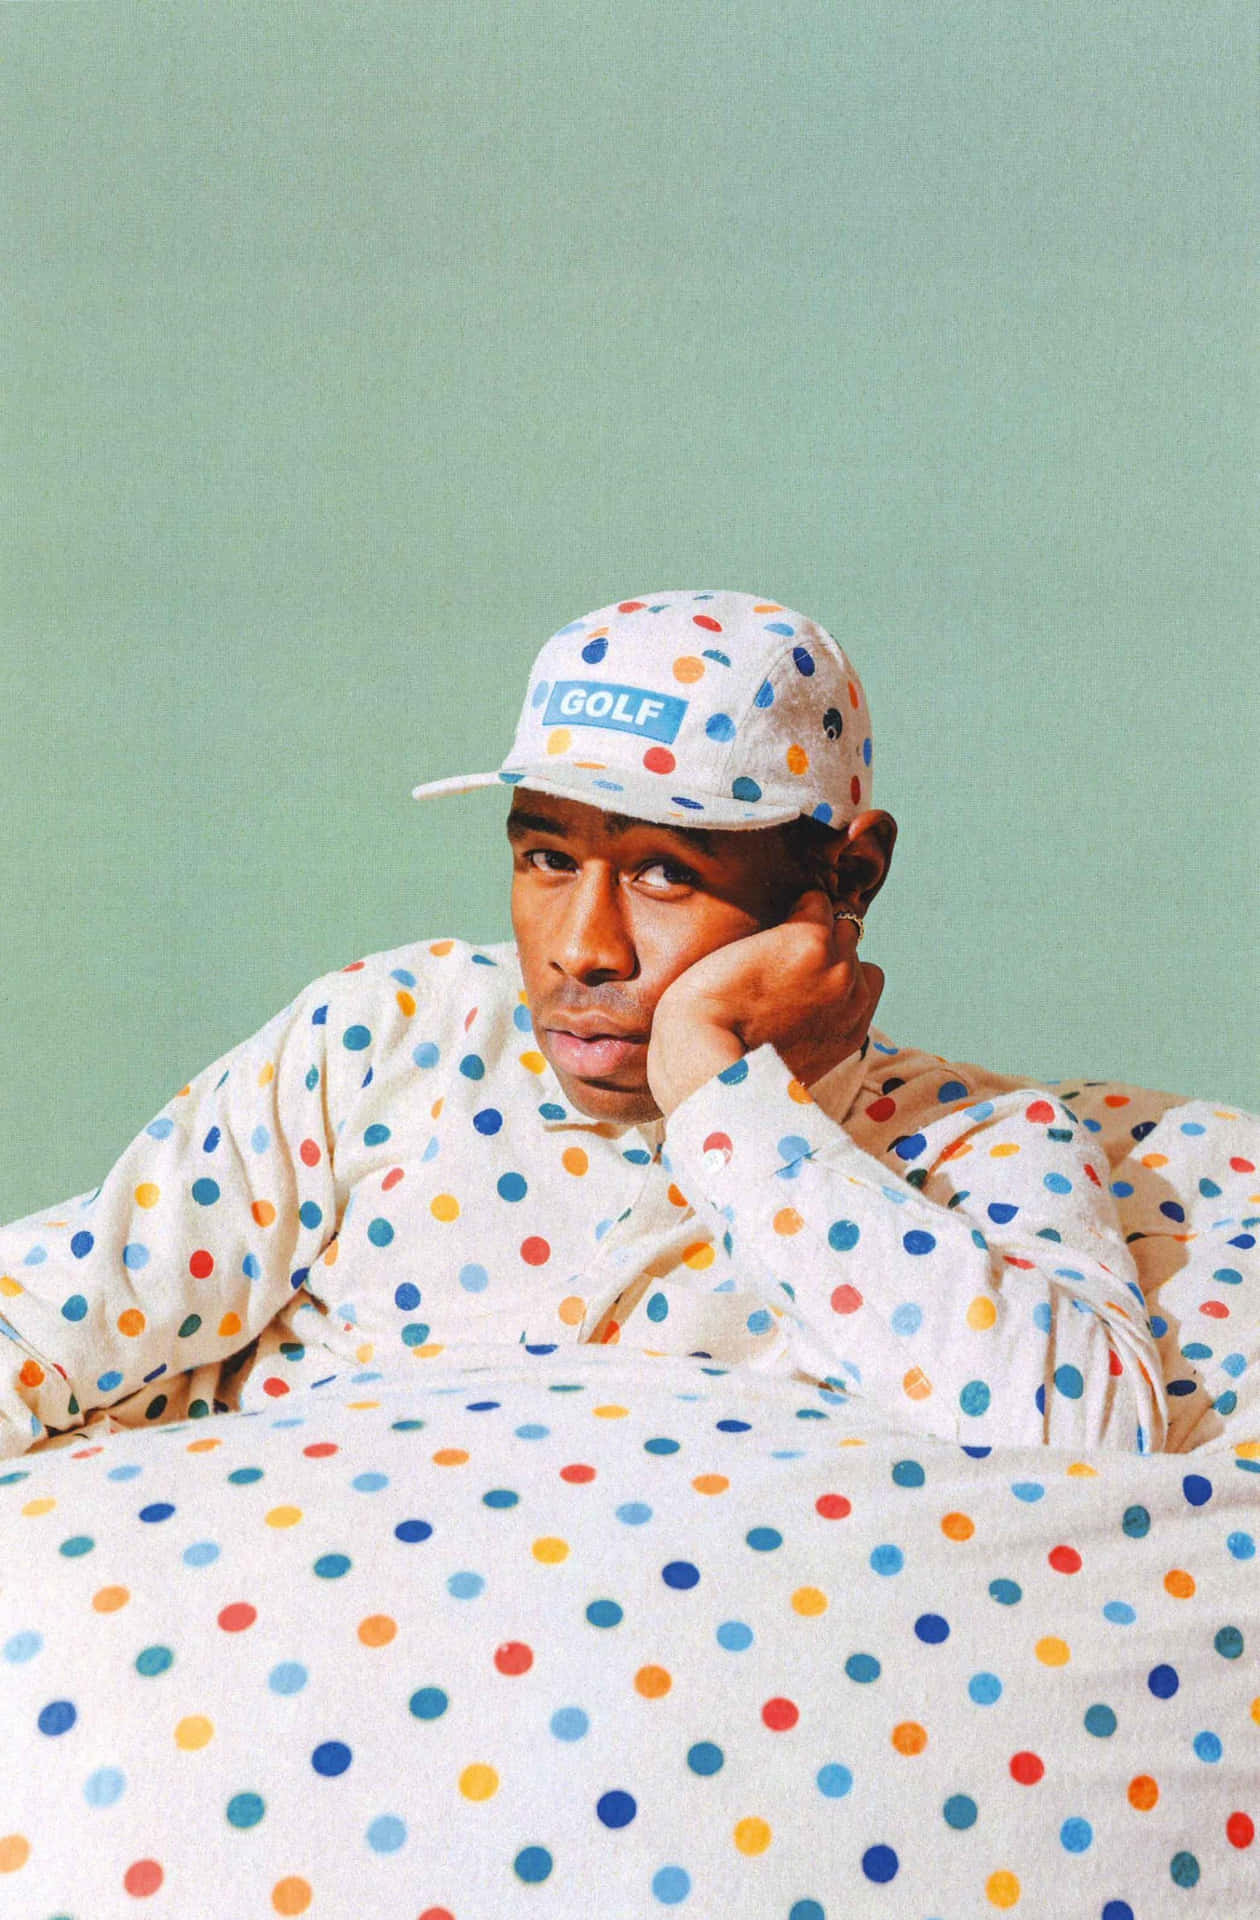 Download Face Of Tyler The Creator PFP Wallpaper